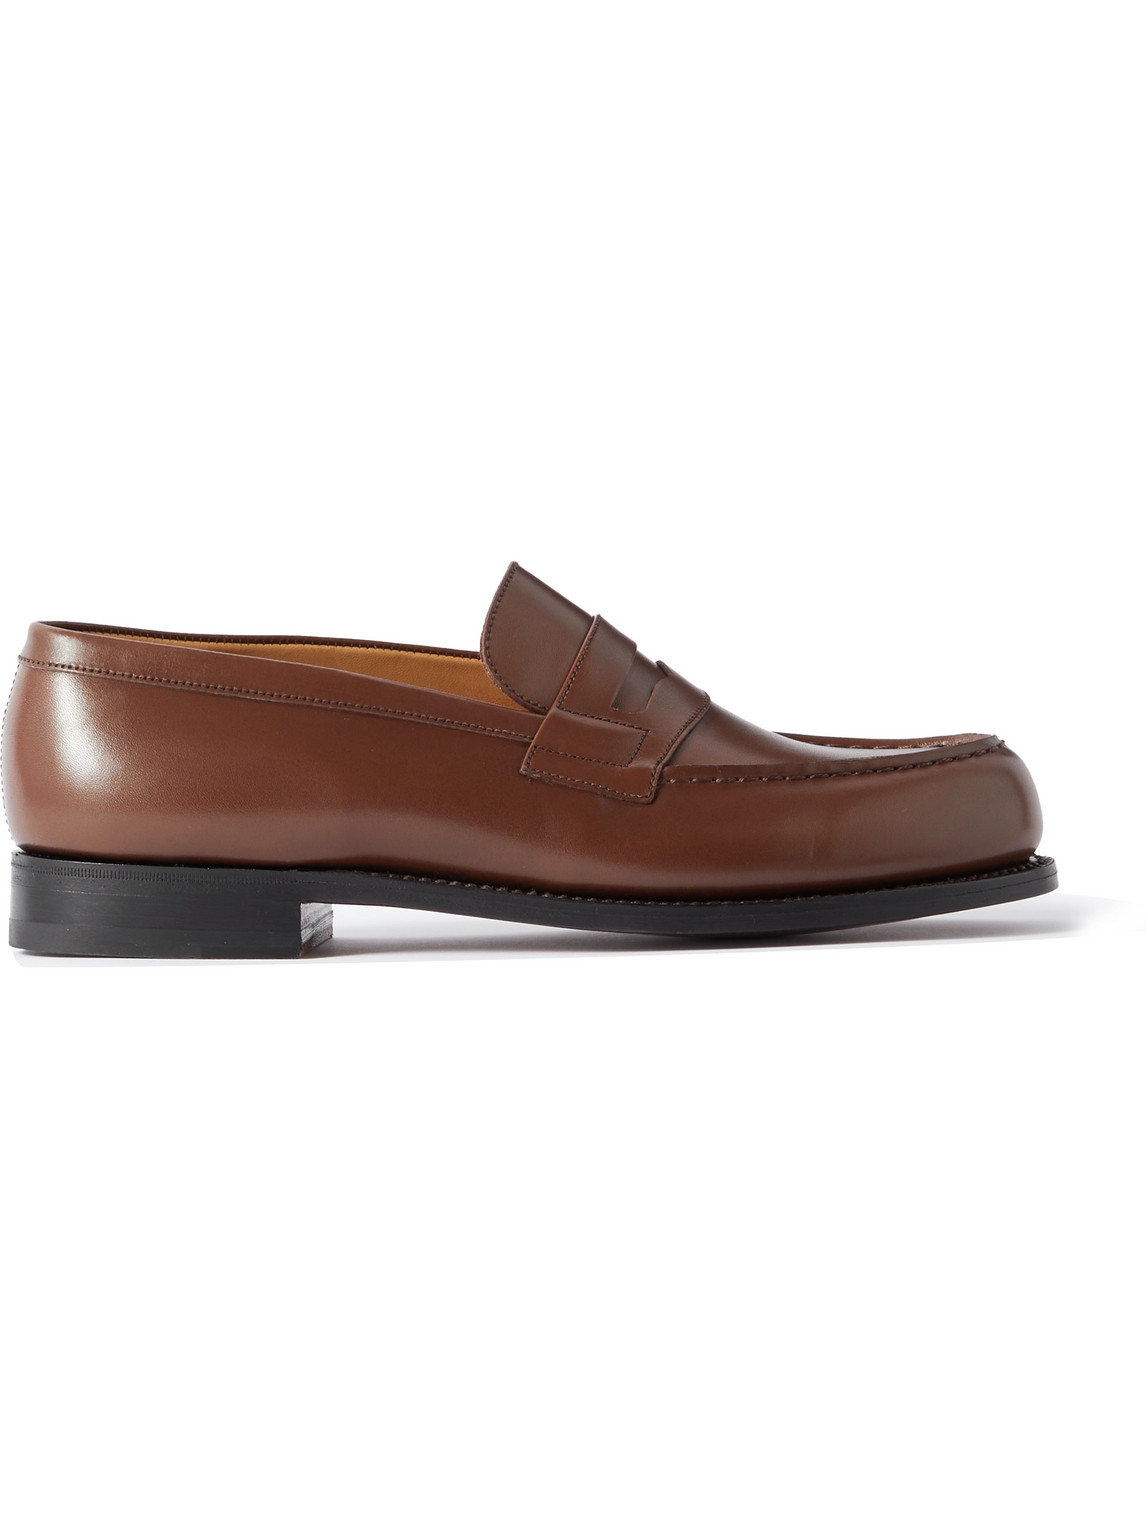 Jm Weston Leather Loafers In Brown